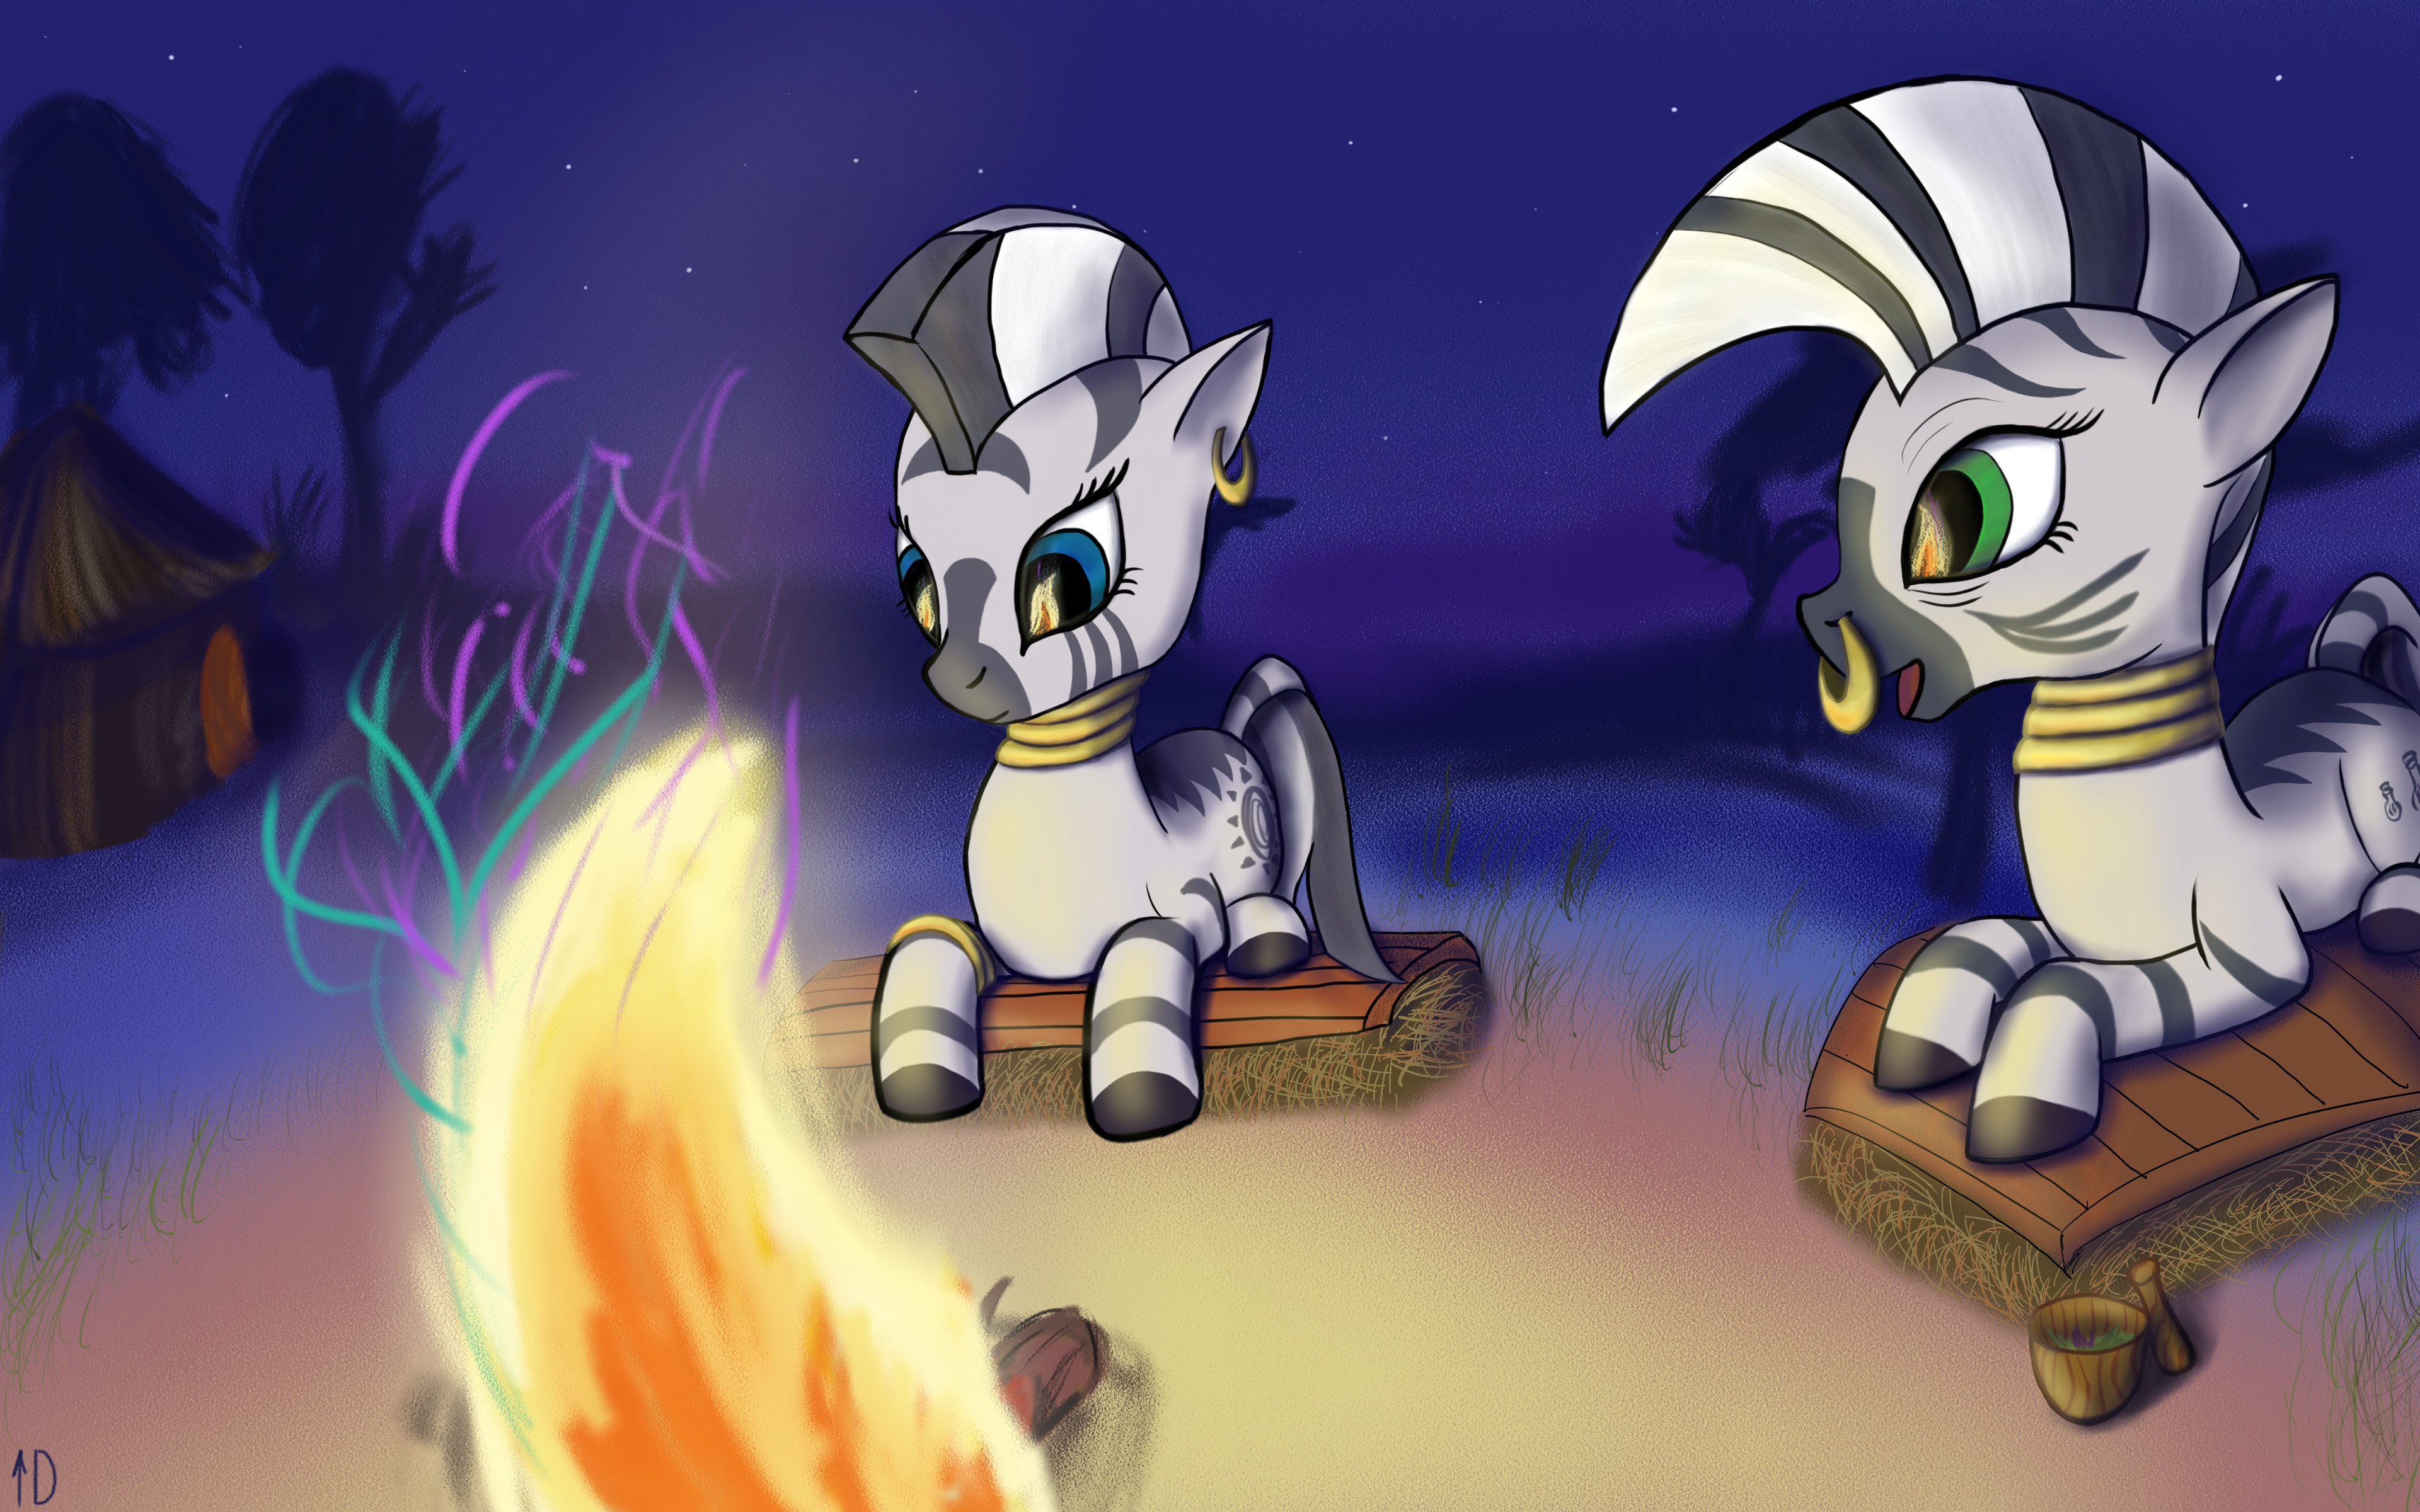 zecora_training___mystery_of_fire_by_iov